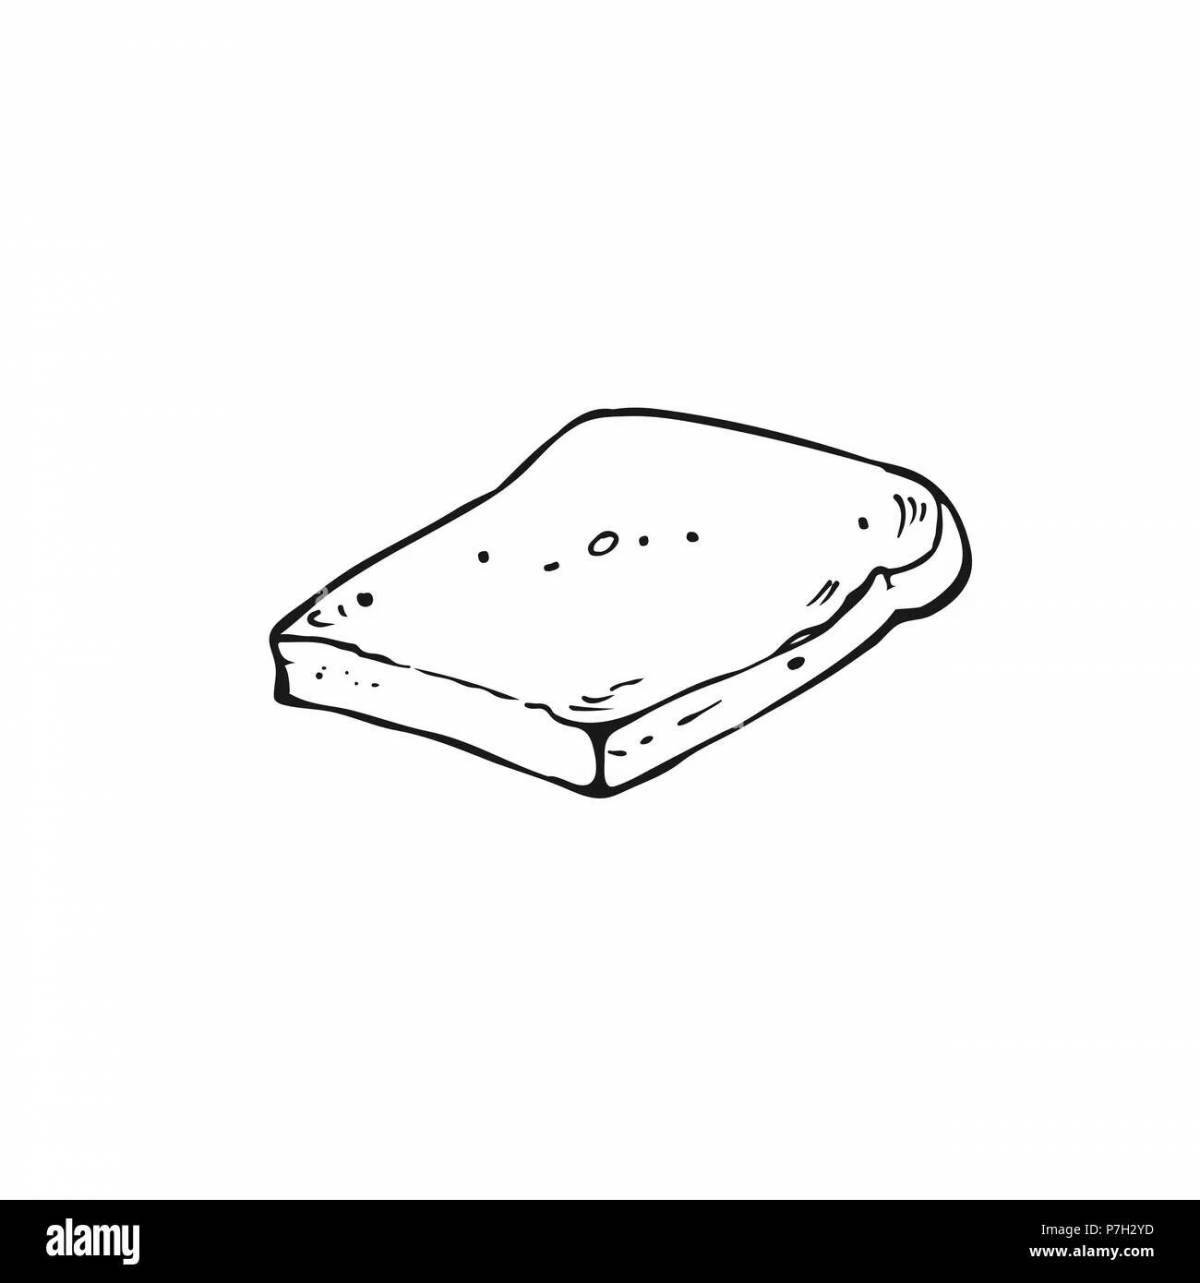 Coloring page of colored toasts